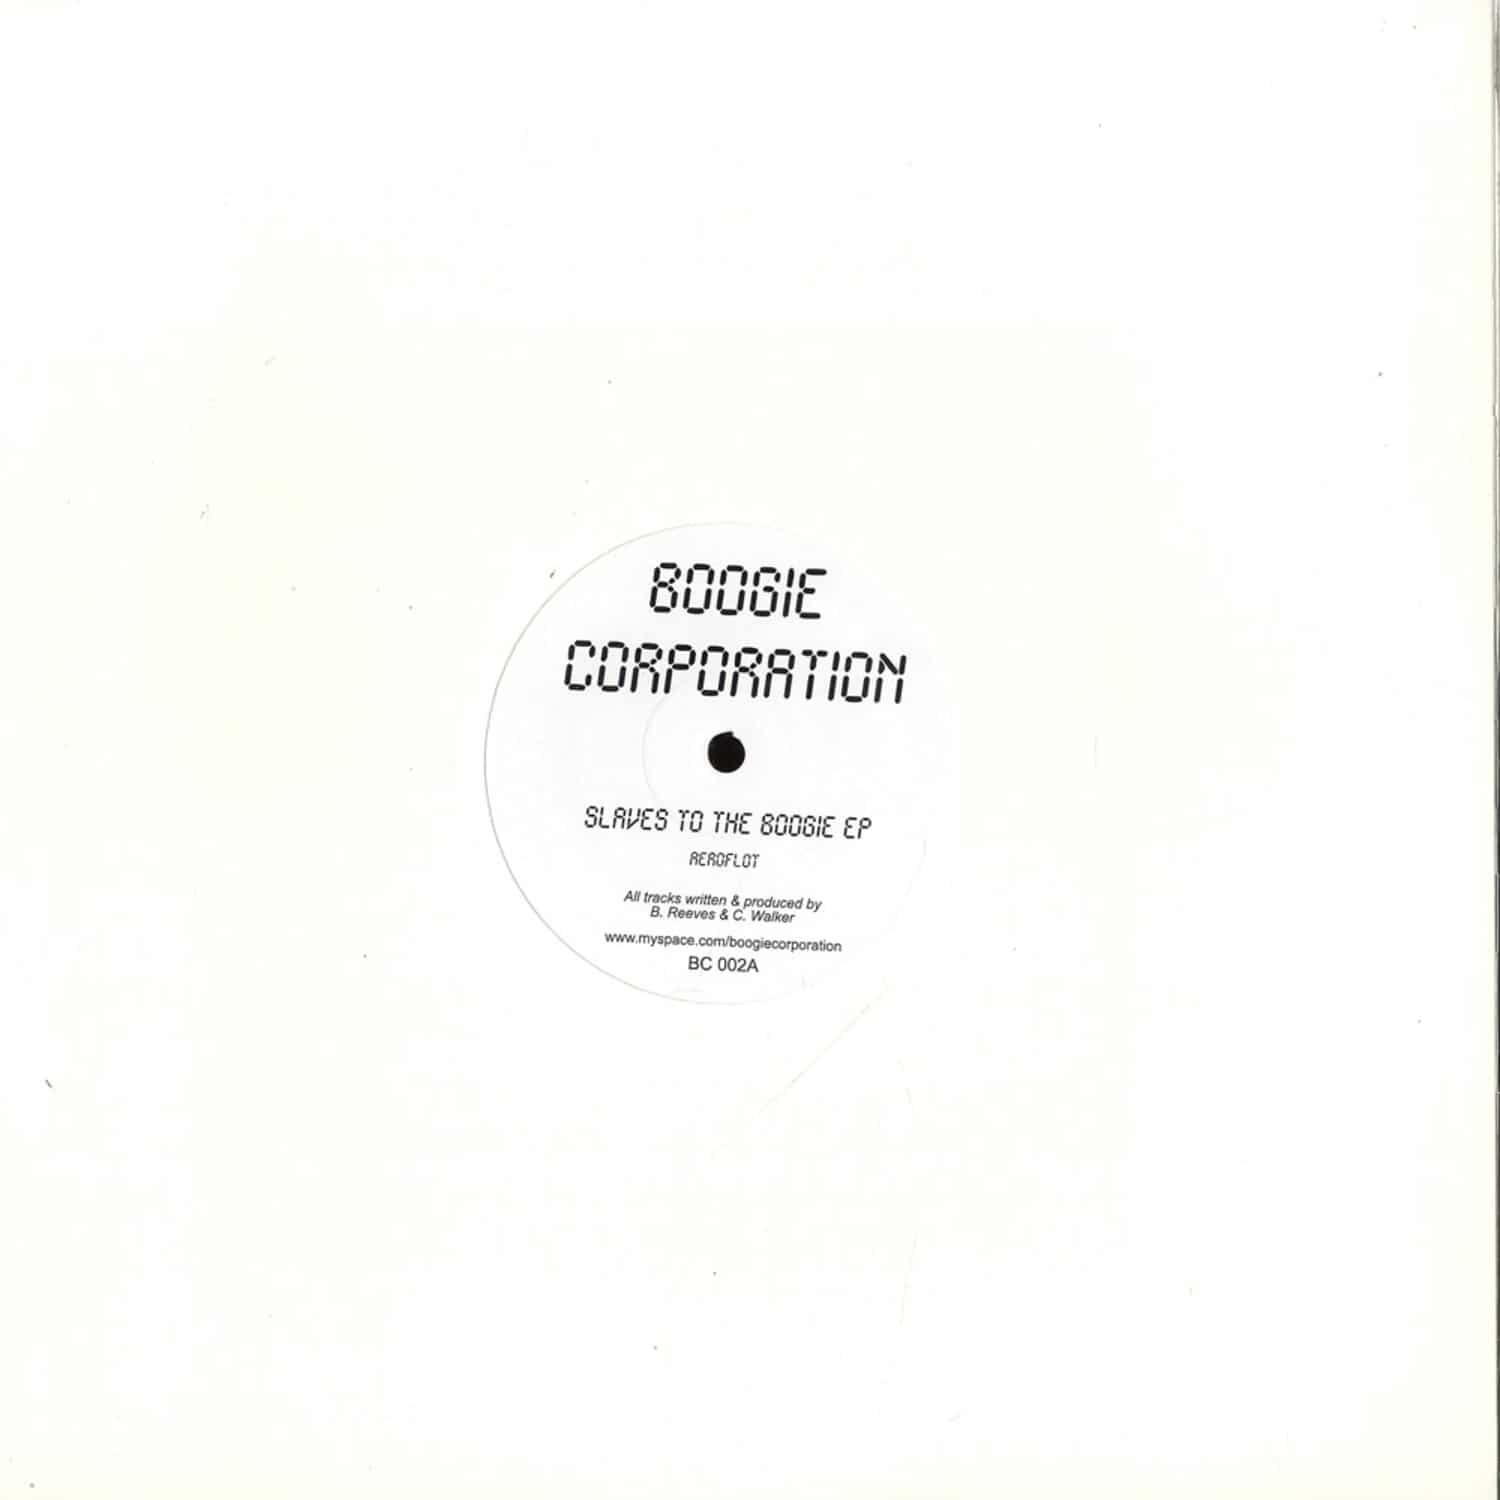 Boogie Corporation - SLAVES TO THE BOOGIE EP